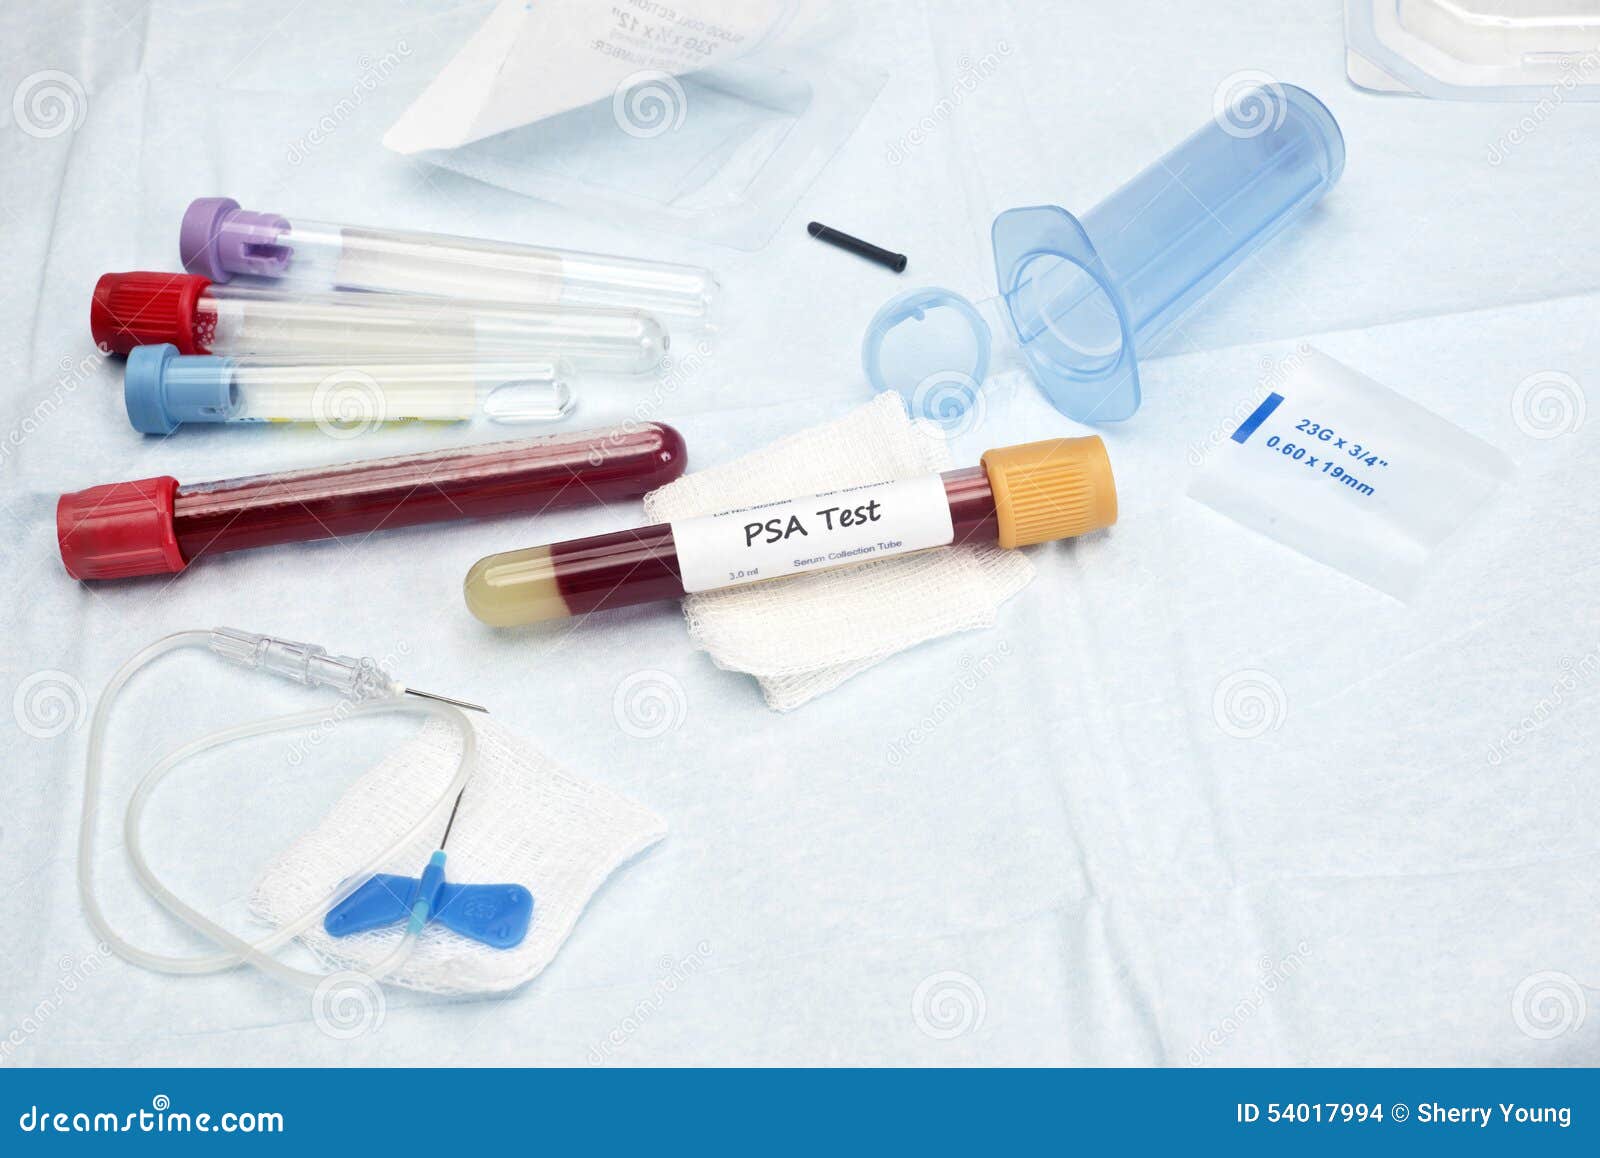 What is a PSA test?